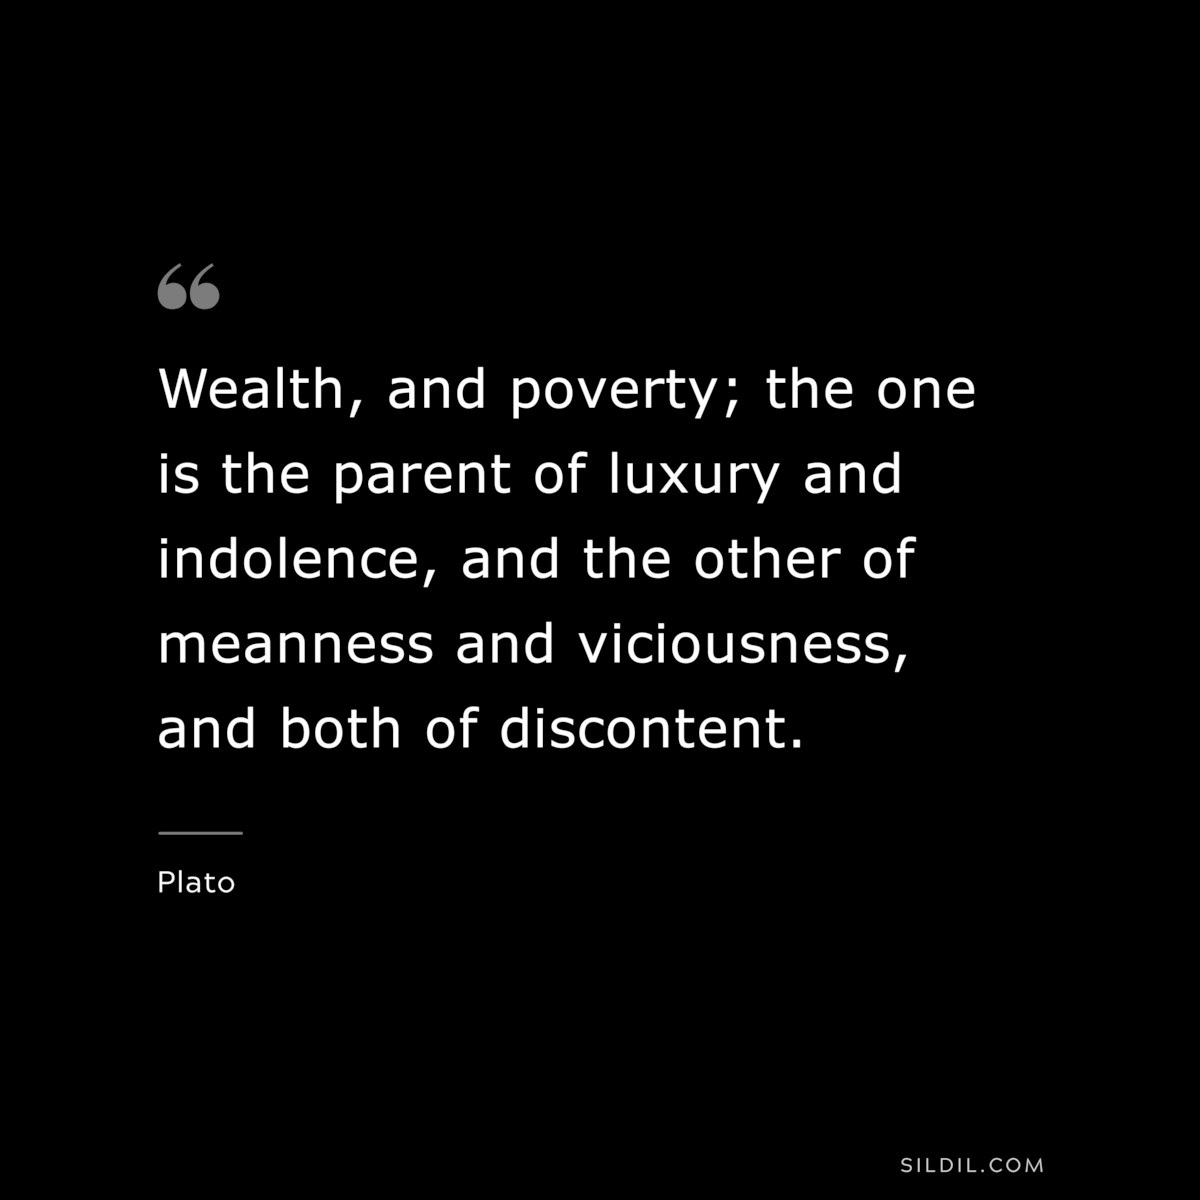 Wealth, and poverty; the one is the parent of luxury and indolence, and the other of meanness and viciousness, and both of discontent. ― Plato